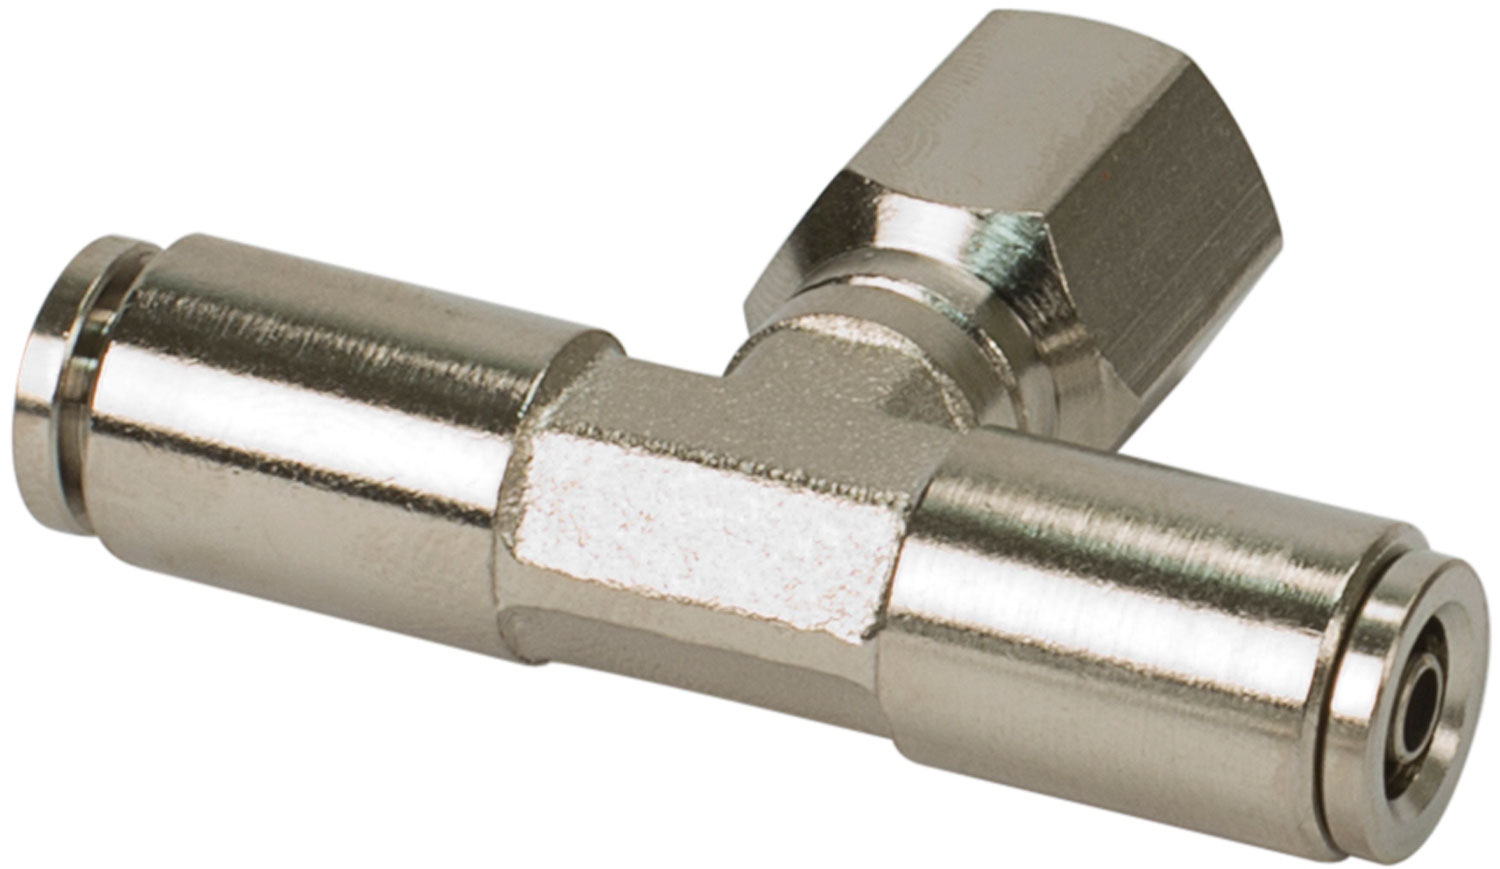 Swivel T-Fitting Push-to-Connect Fitting